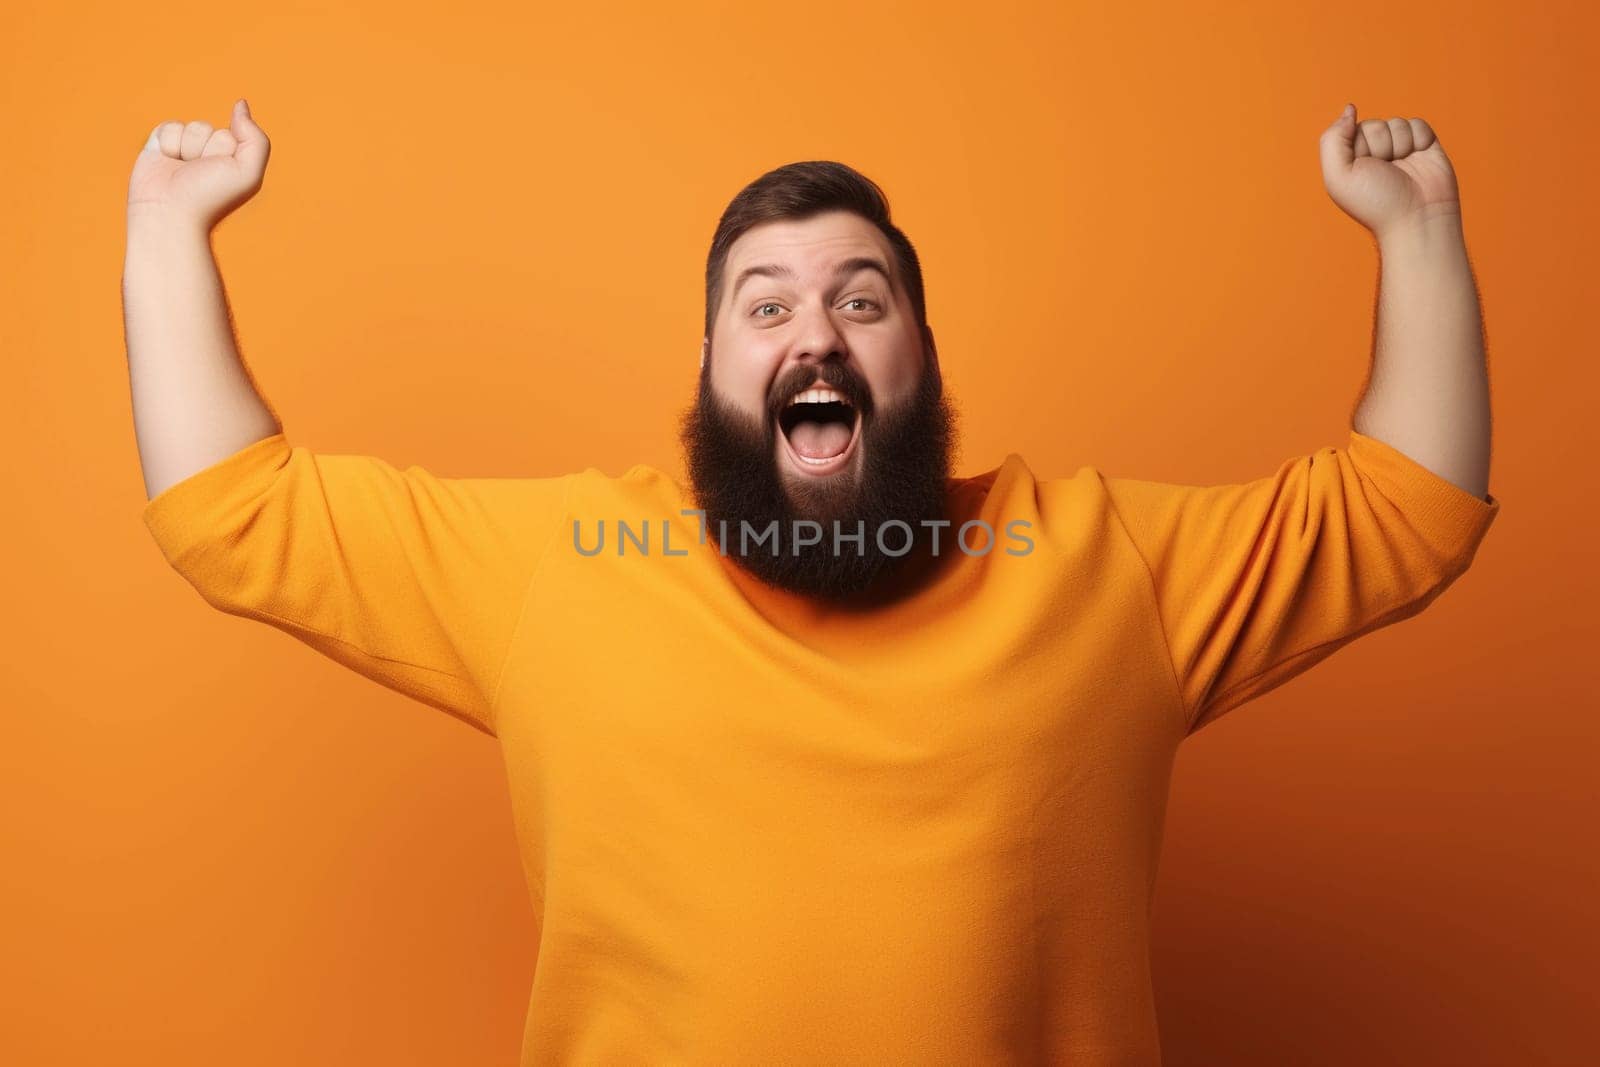 A man with a beard and a yellow shirt is celebrating a victory.